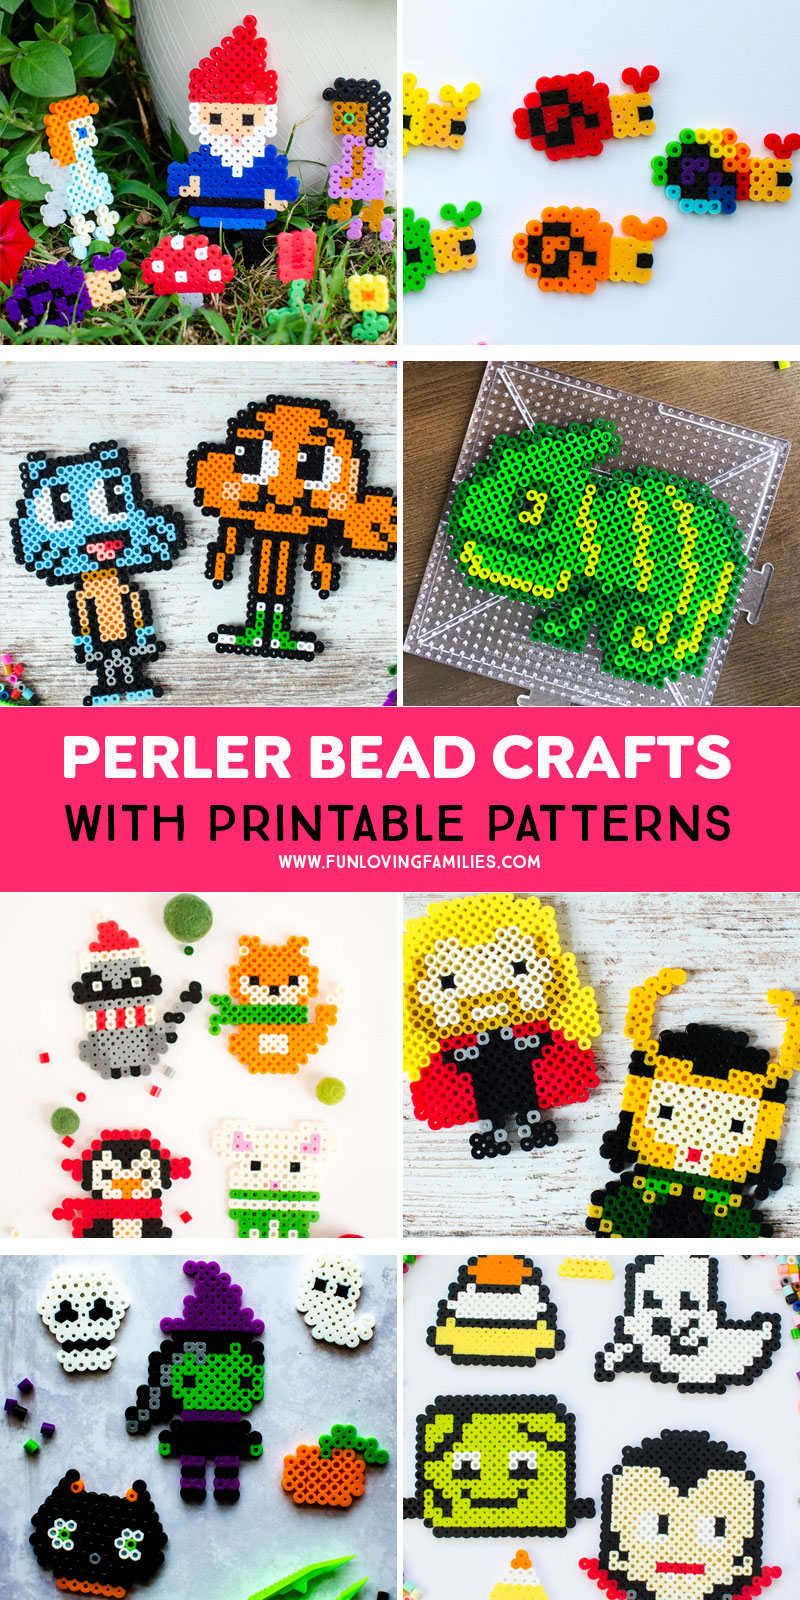 20+ Free Perler Bead Patterns and Craft Ideas - Fun Loving Families Inside Hama Bead Letter Templates